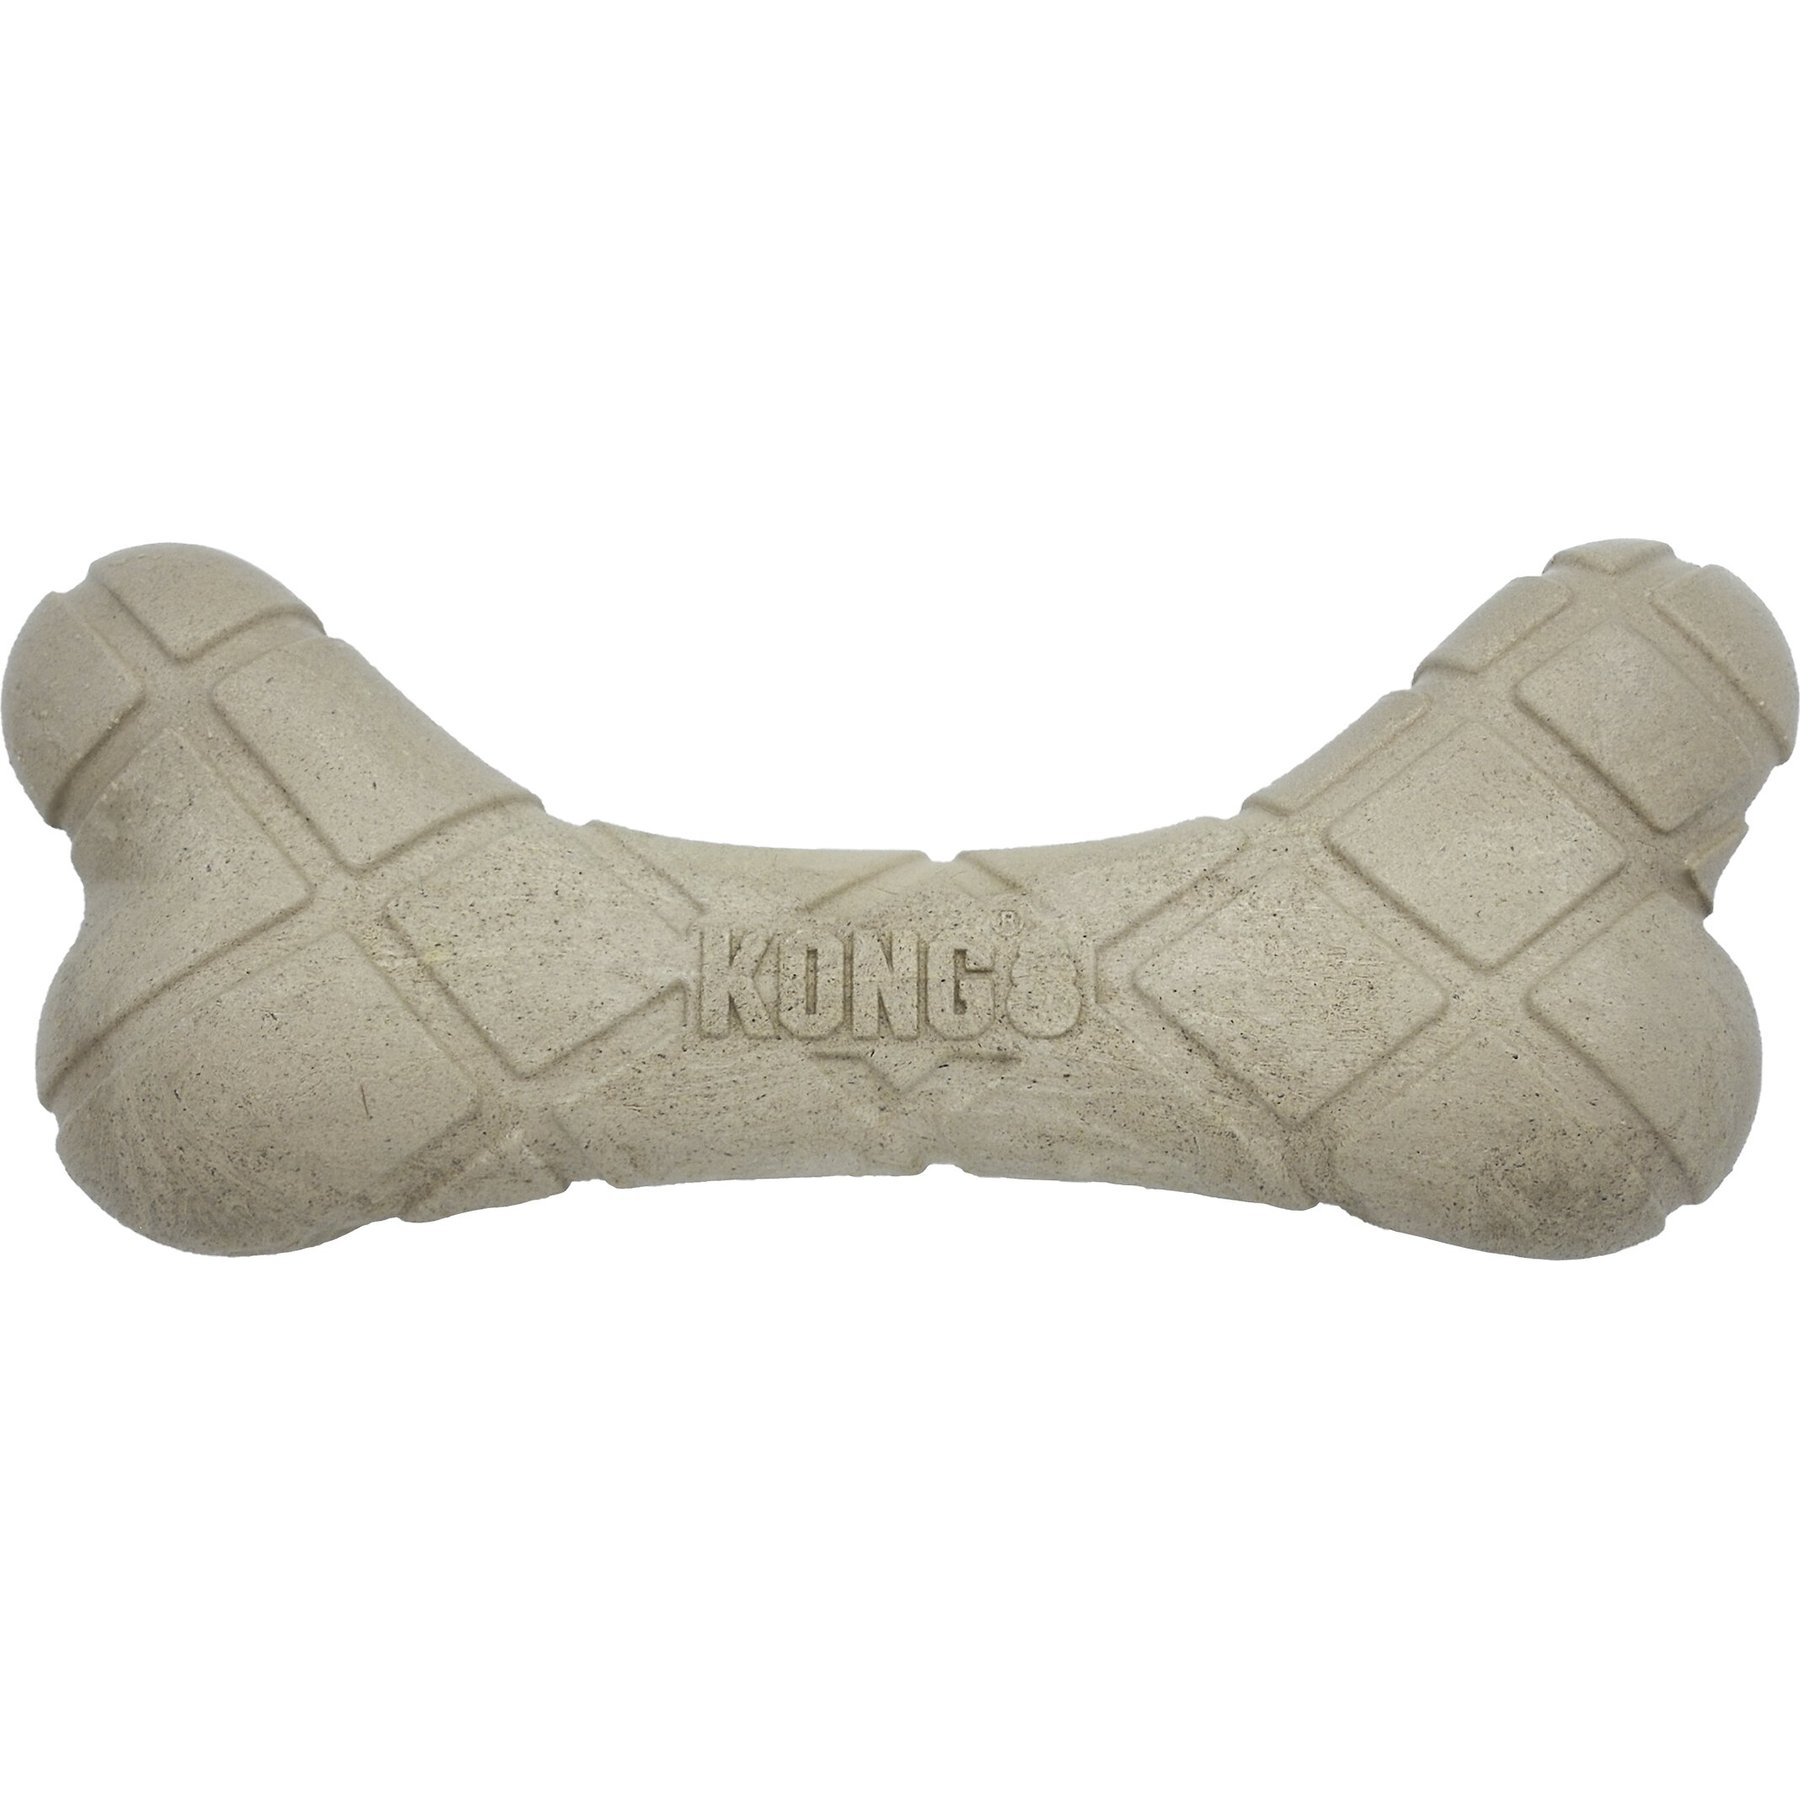 Classic KONG Hard Rubber Dental Dog Toys - XX-Large King, red